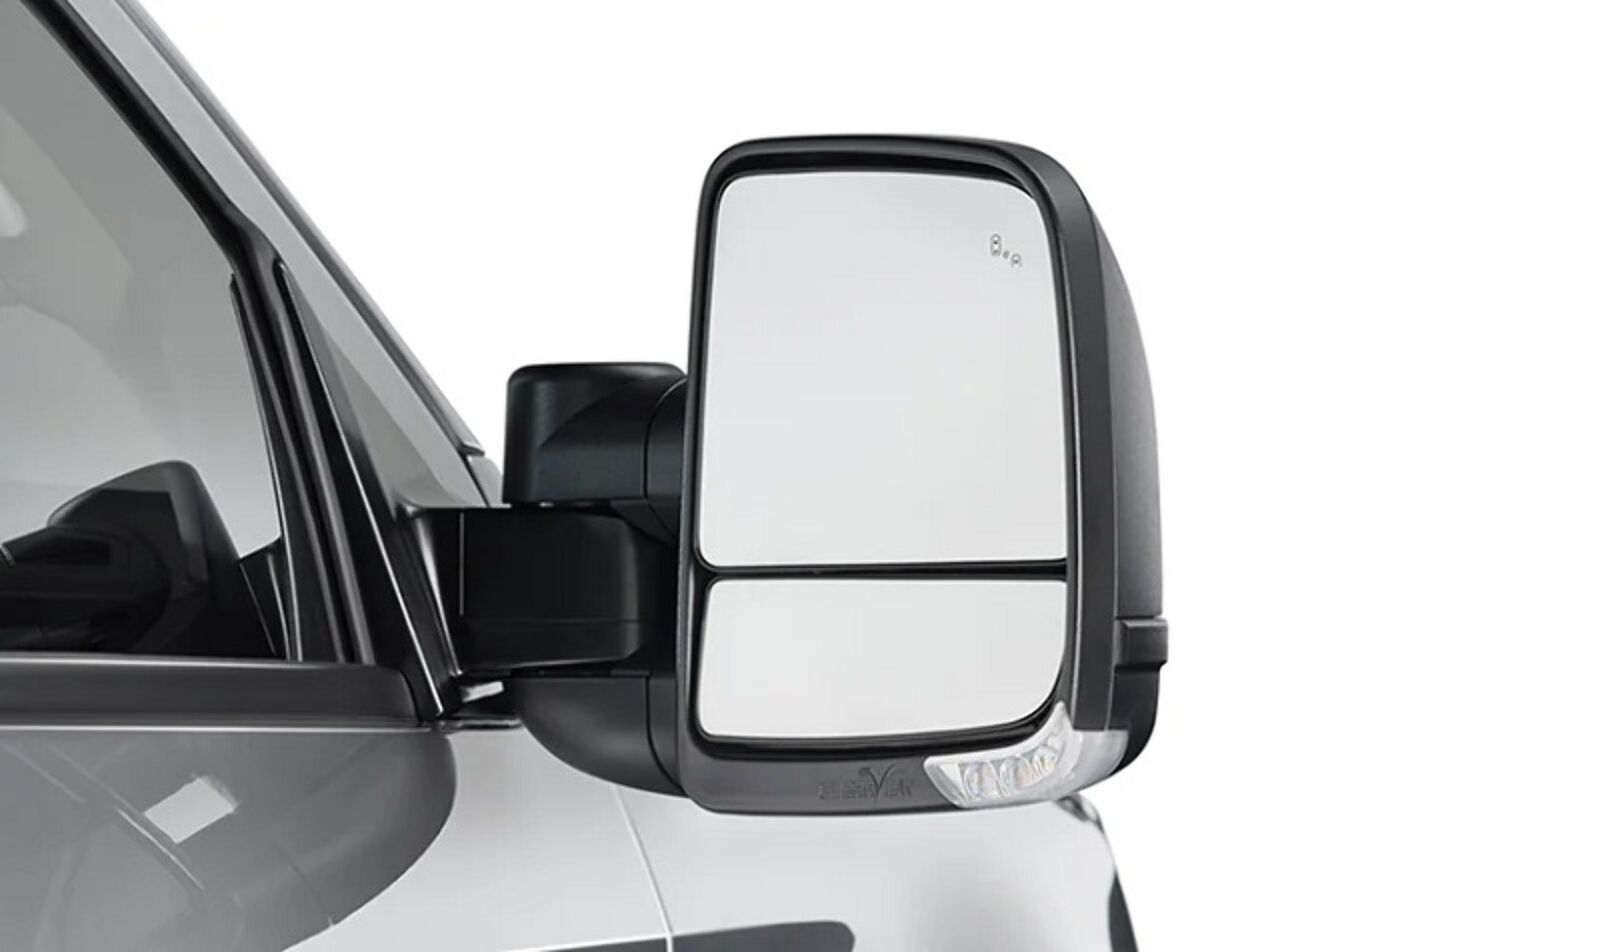 Nissan Navara (2015-2020) NP300 D23 Clearview Towing Mirrors